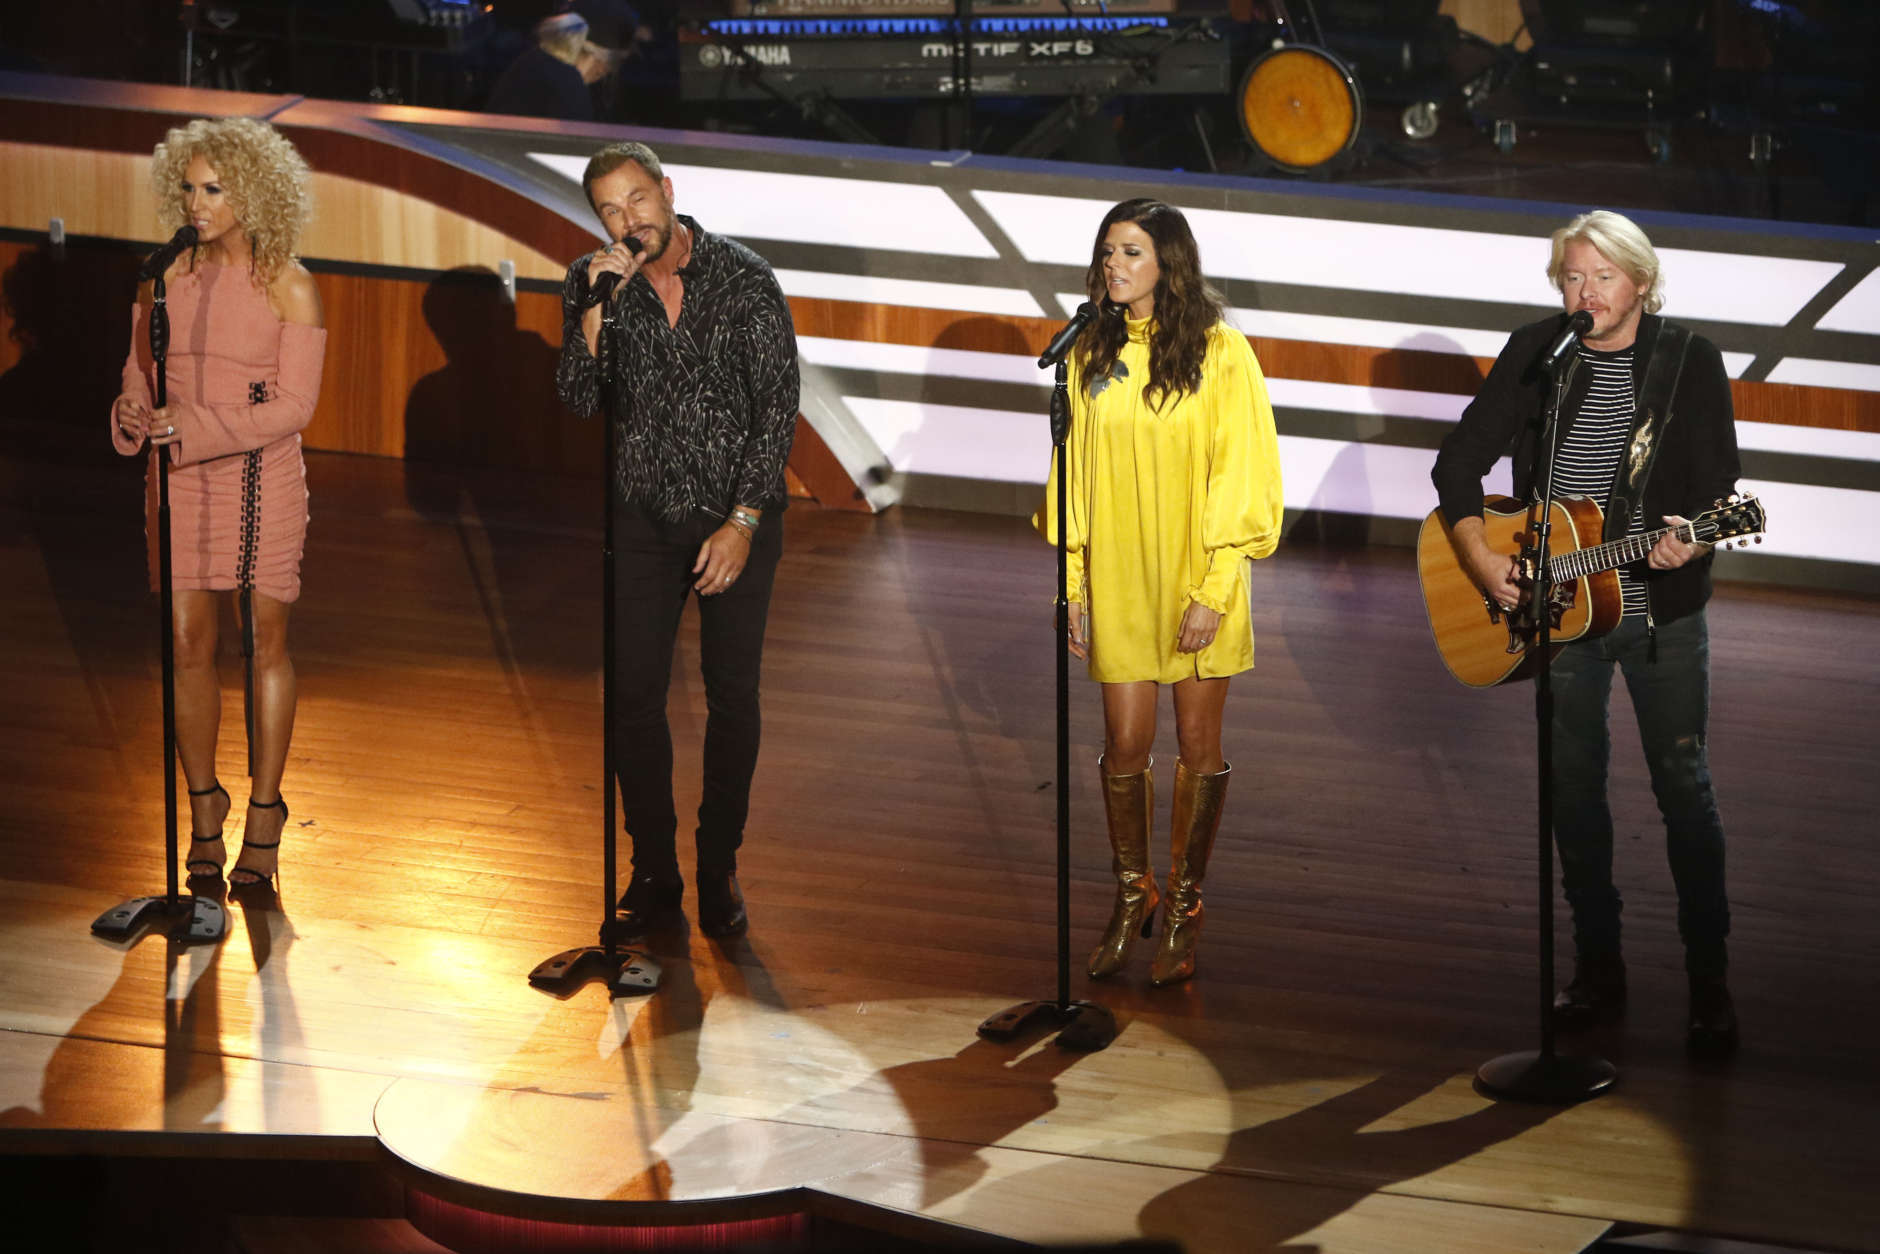 Little Big Town performs during the 11th annual ACM Honors at the Ryman Auditorium on Wednesday, Aug. 23, 2017, in Nashville, Tenn. (Photo by Wade Payne/Invision/AP)